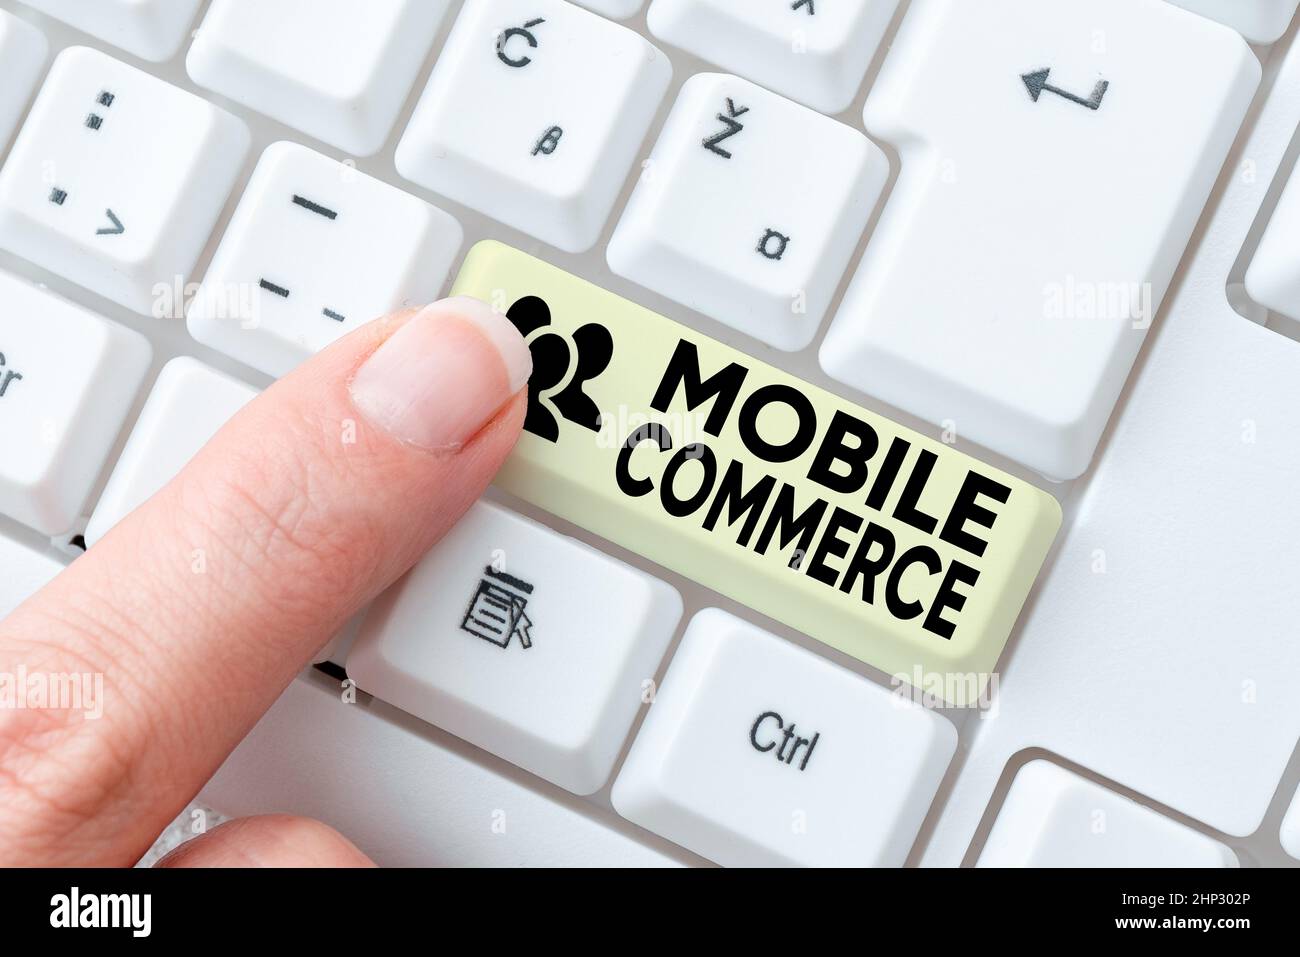 Sign displaying Mobile Commerce, Business idea Using mobile phone to conduct commercial transactions online Transcribing Internet Meeting Audio Record Stock Photo